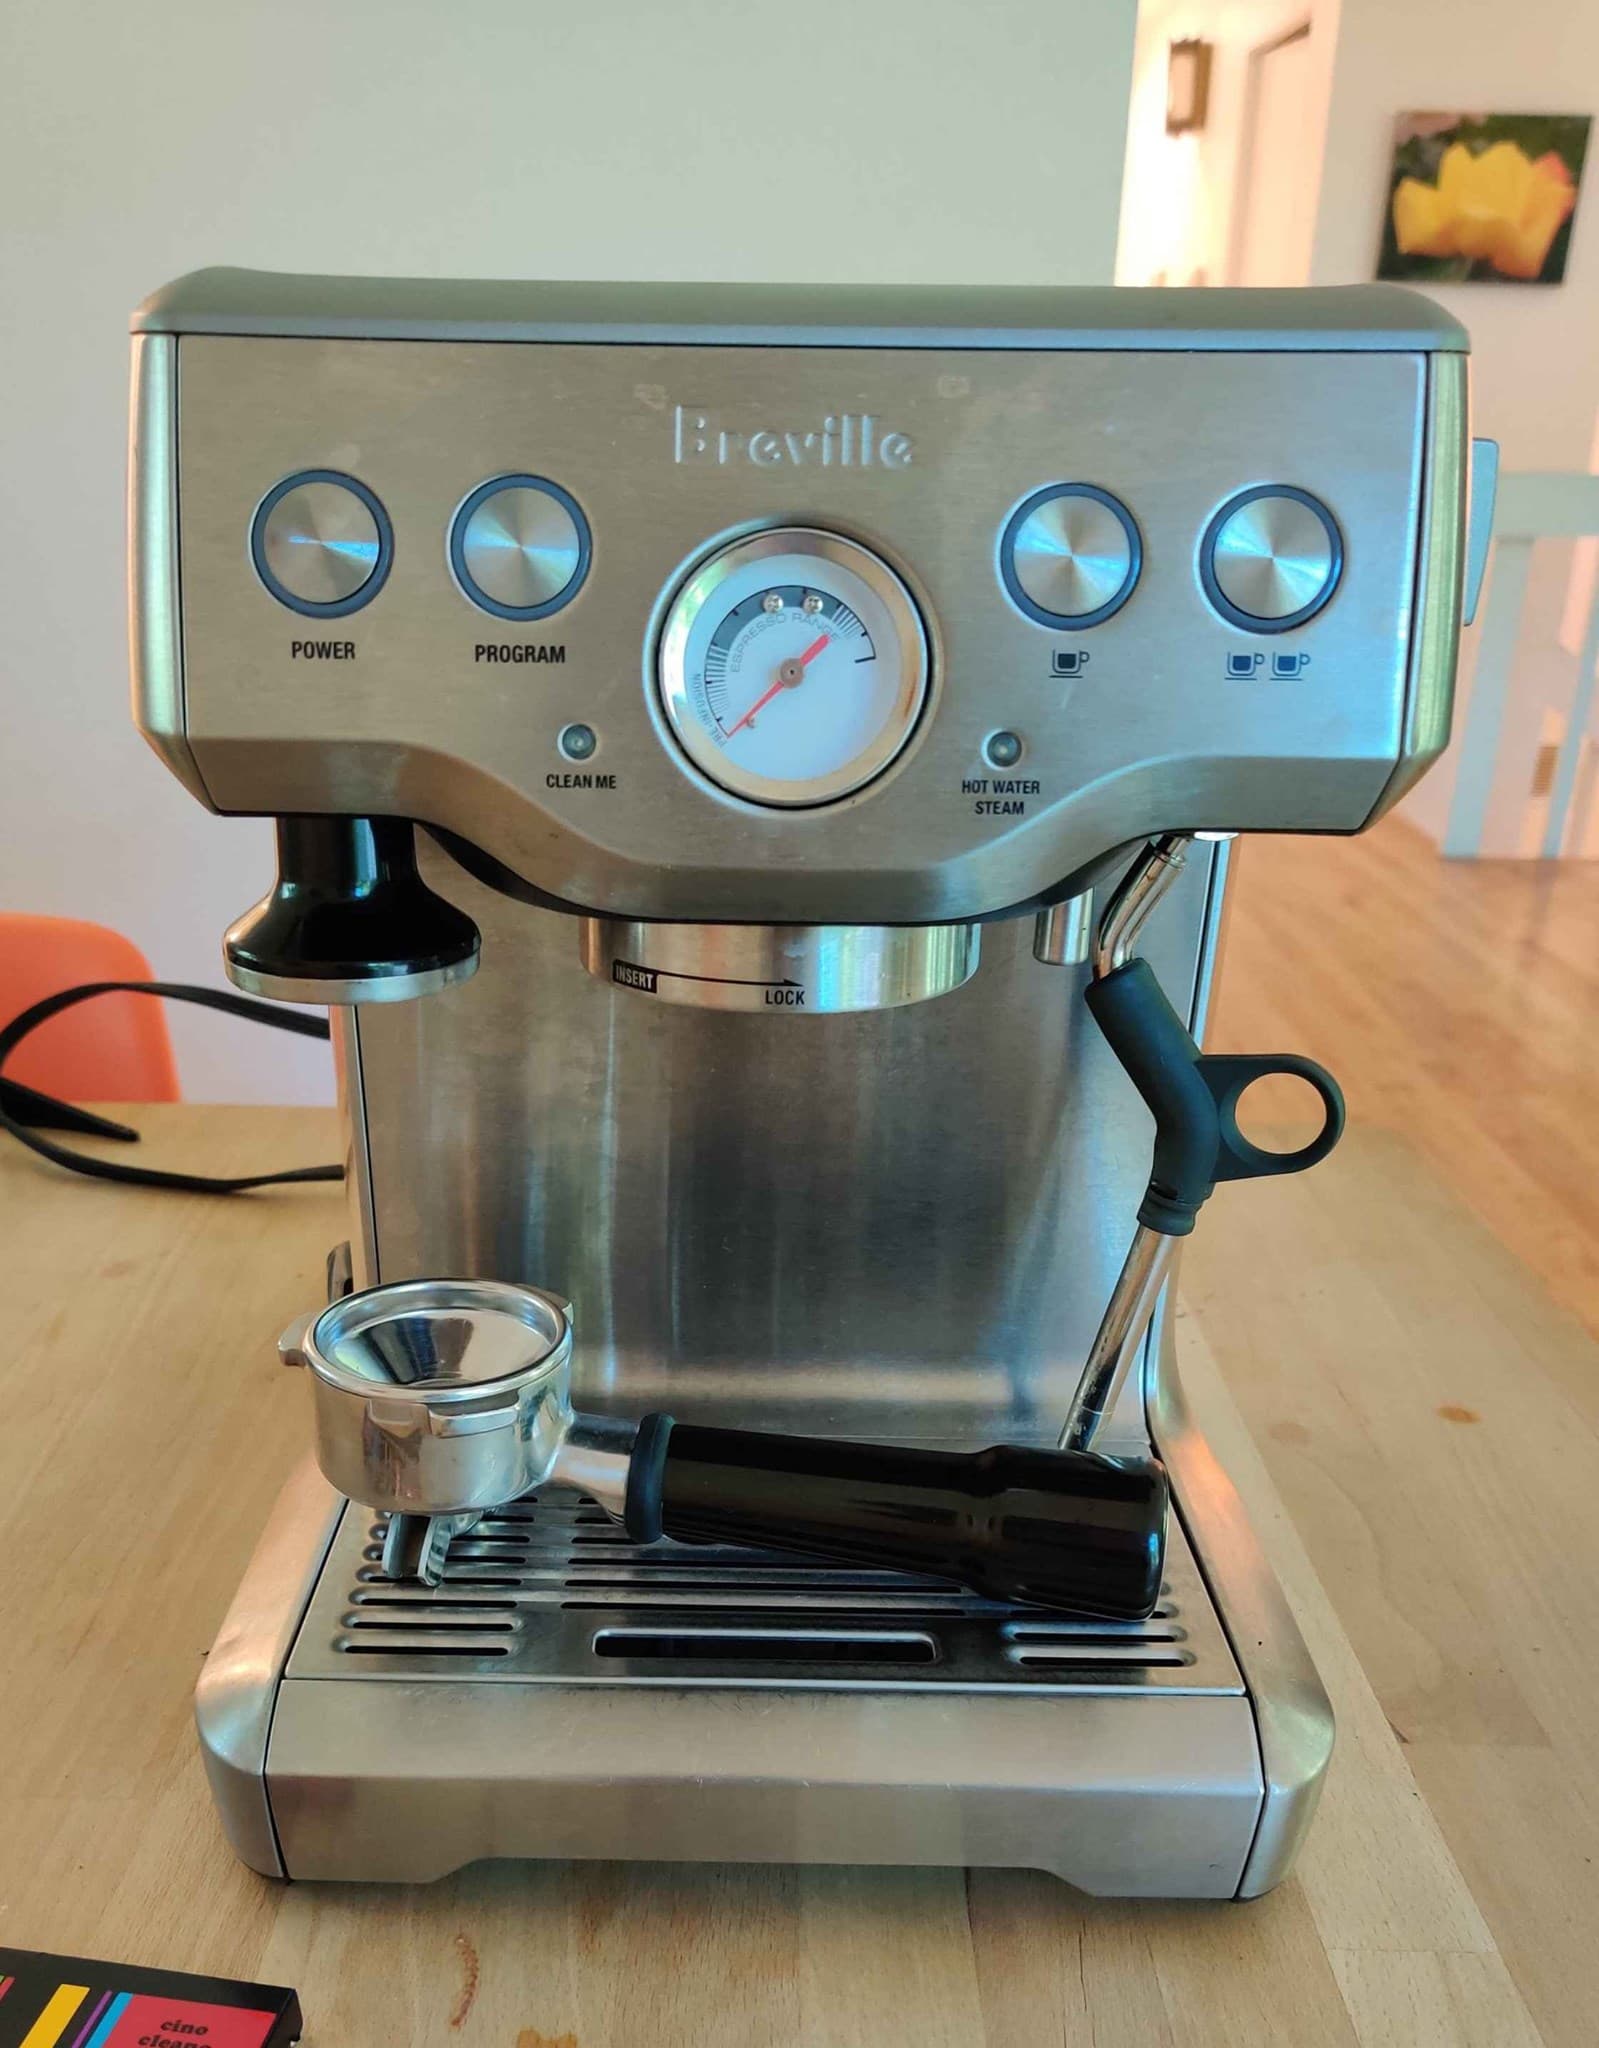 With the Breville Infuser, you get a steam wand with high pressure and convenience